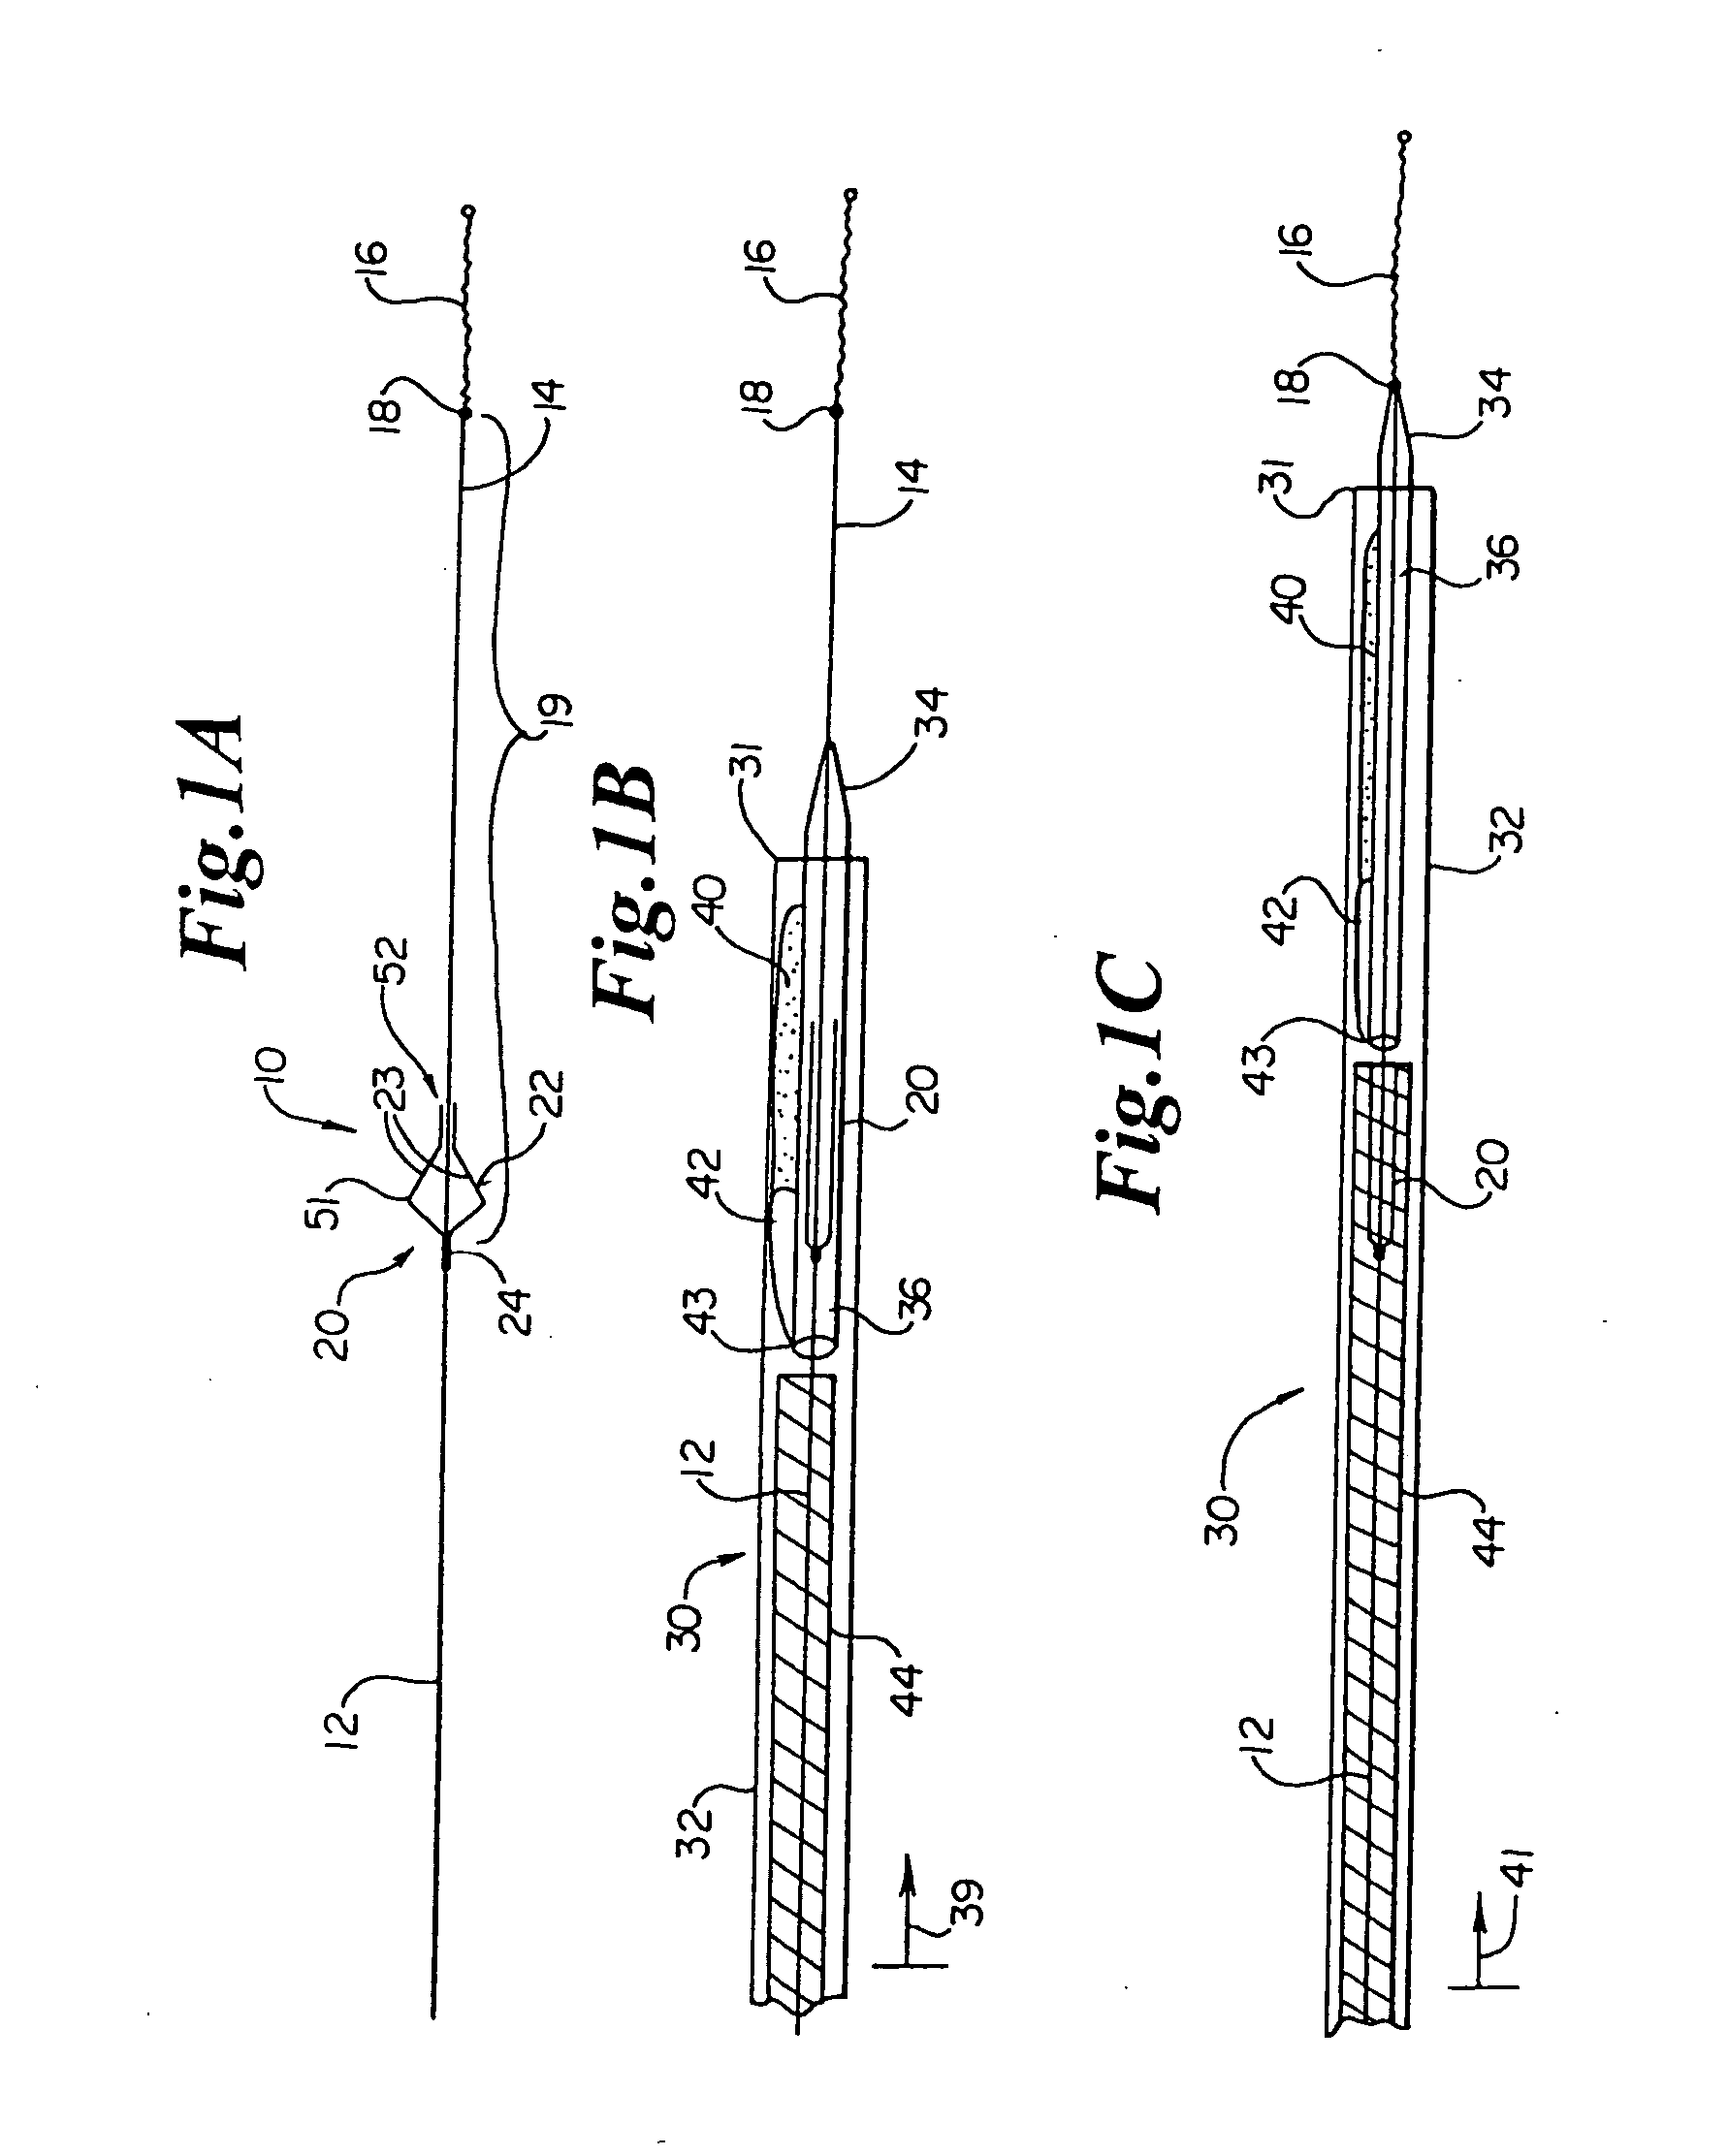 Vascular embolic filter devices and methods of use therefor